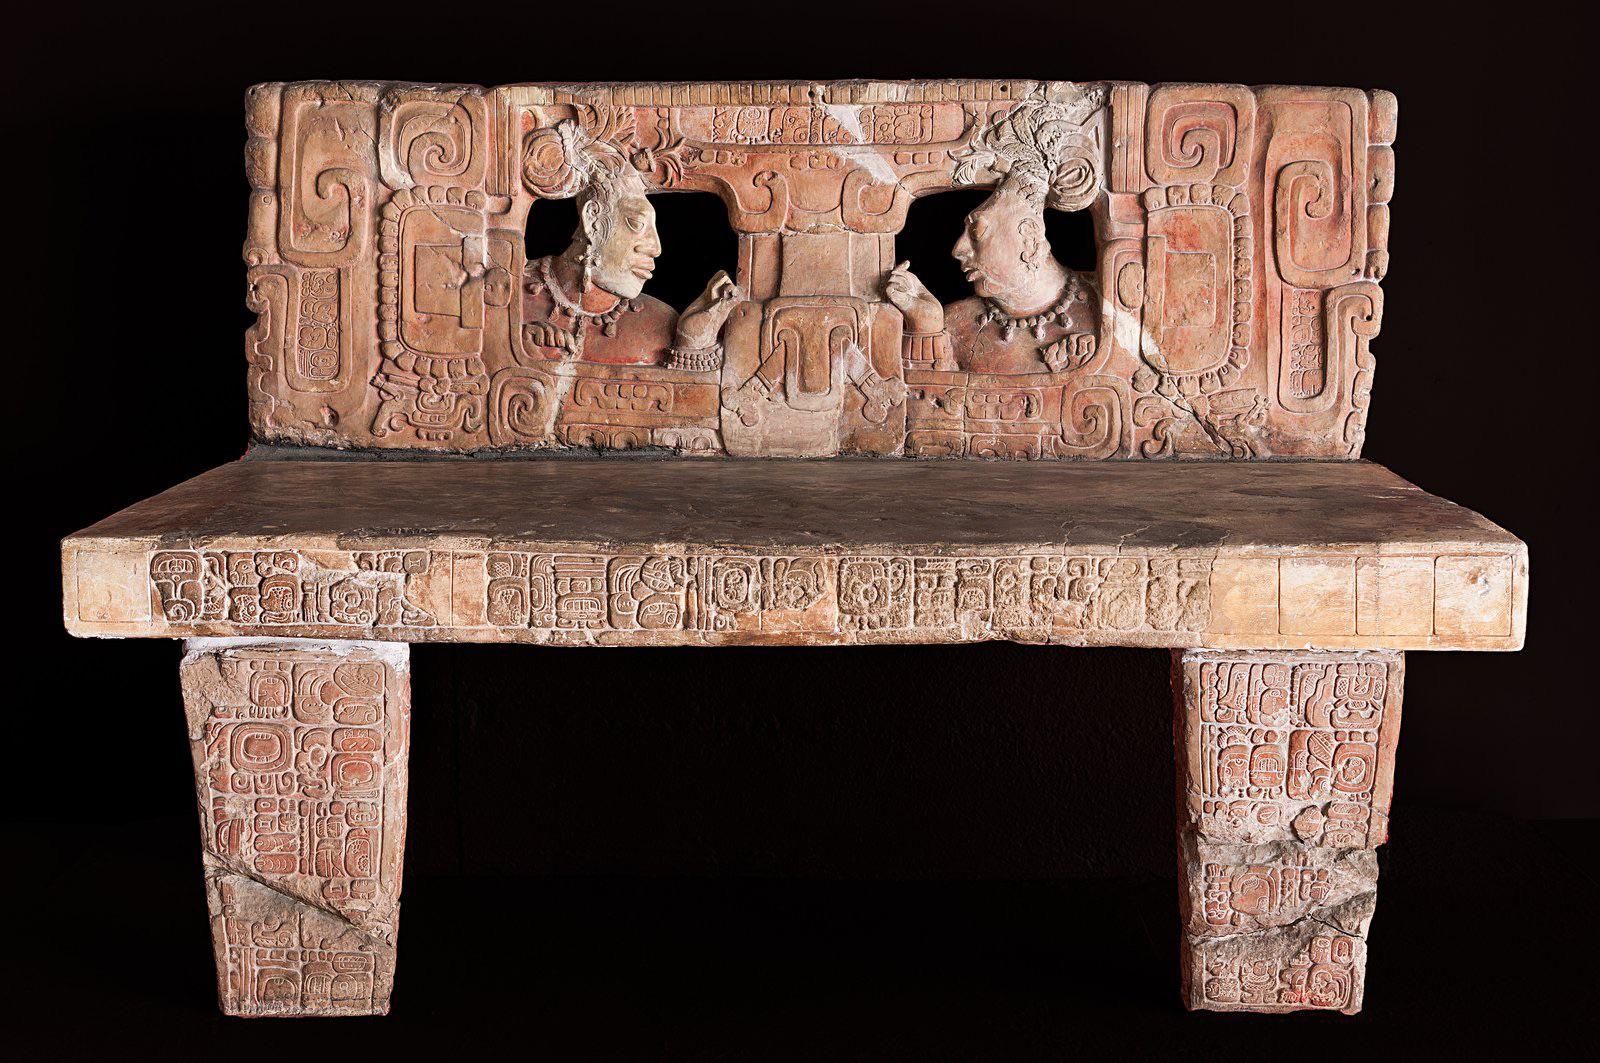 Maya throne featuring two lords in the eyes of a mountain, from Piedras Negras, Guatemala. Currently on loan to the Metropolitan Museum of Art in NYC.jpg